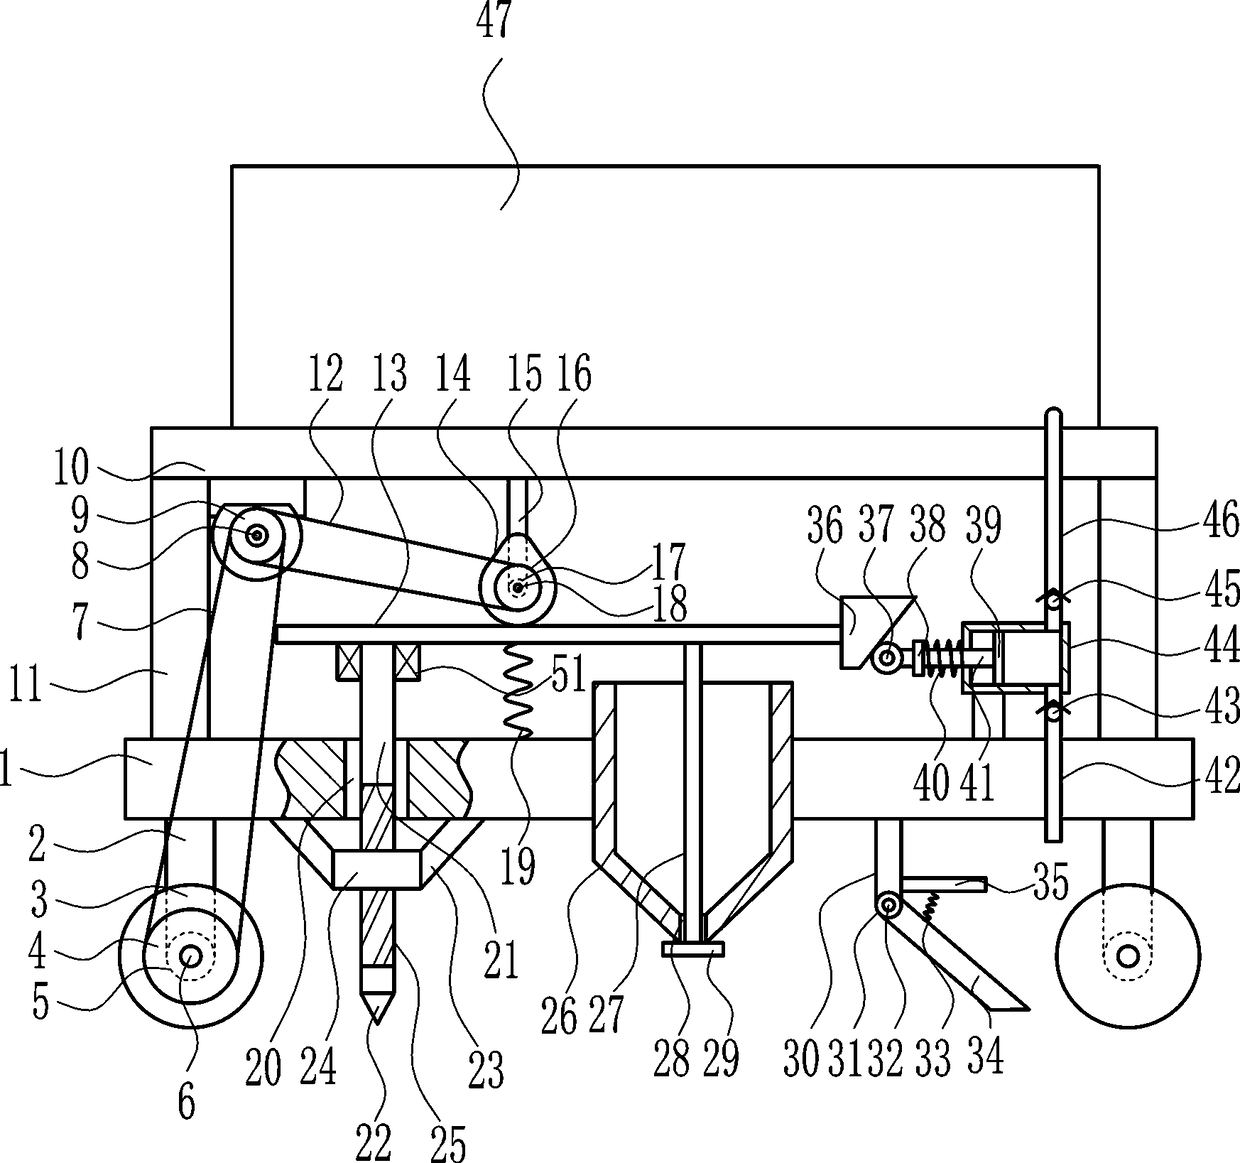 Seedling sowing device